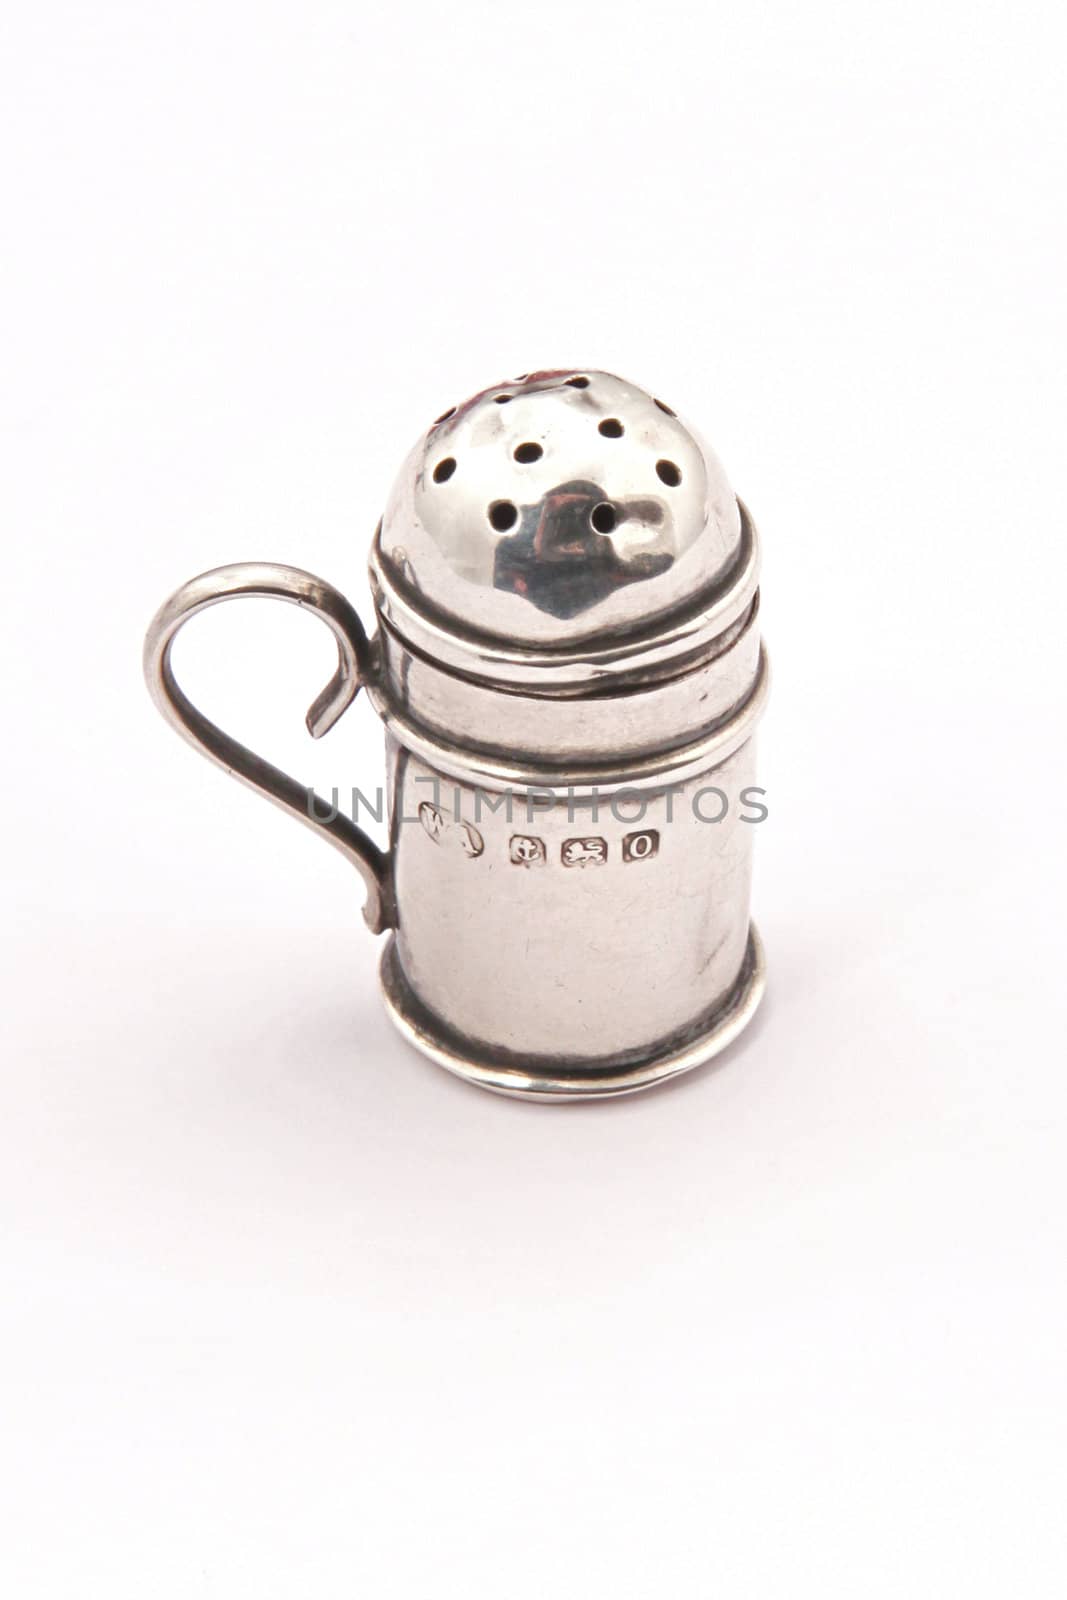 Hallmarked sterling silver pepper pot on a white background.